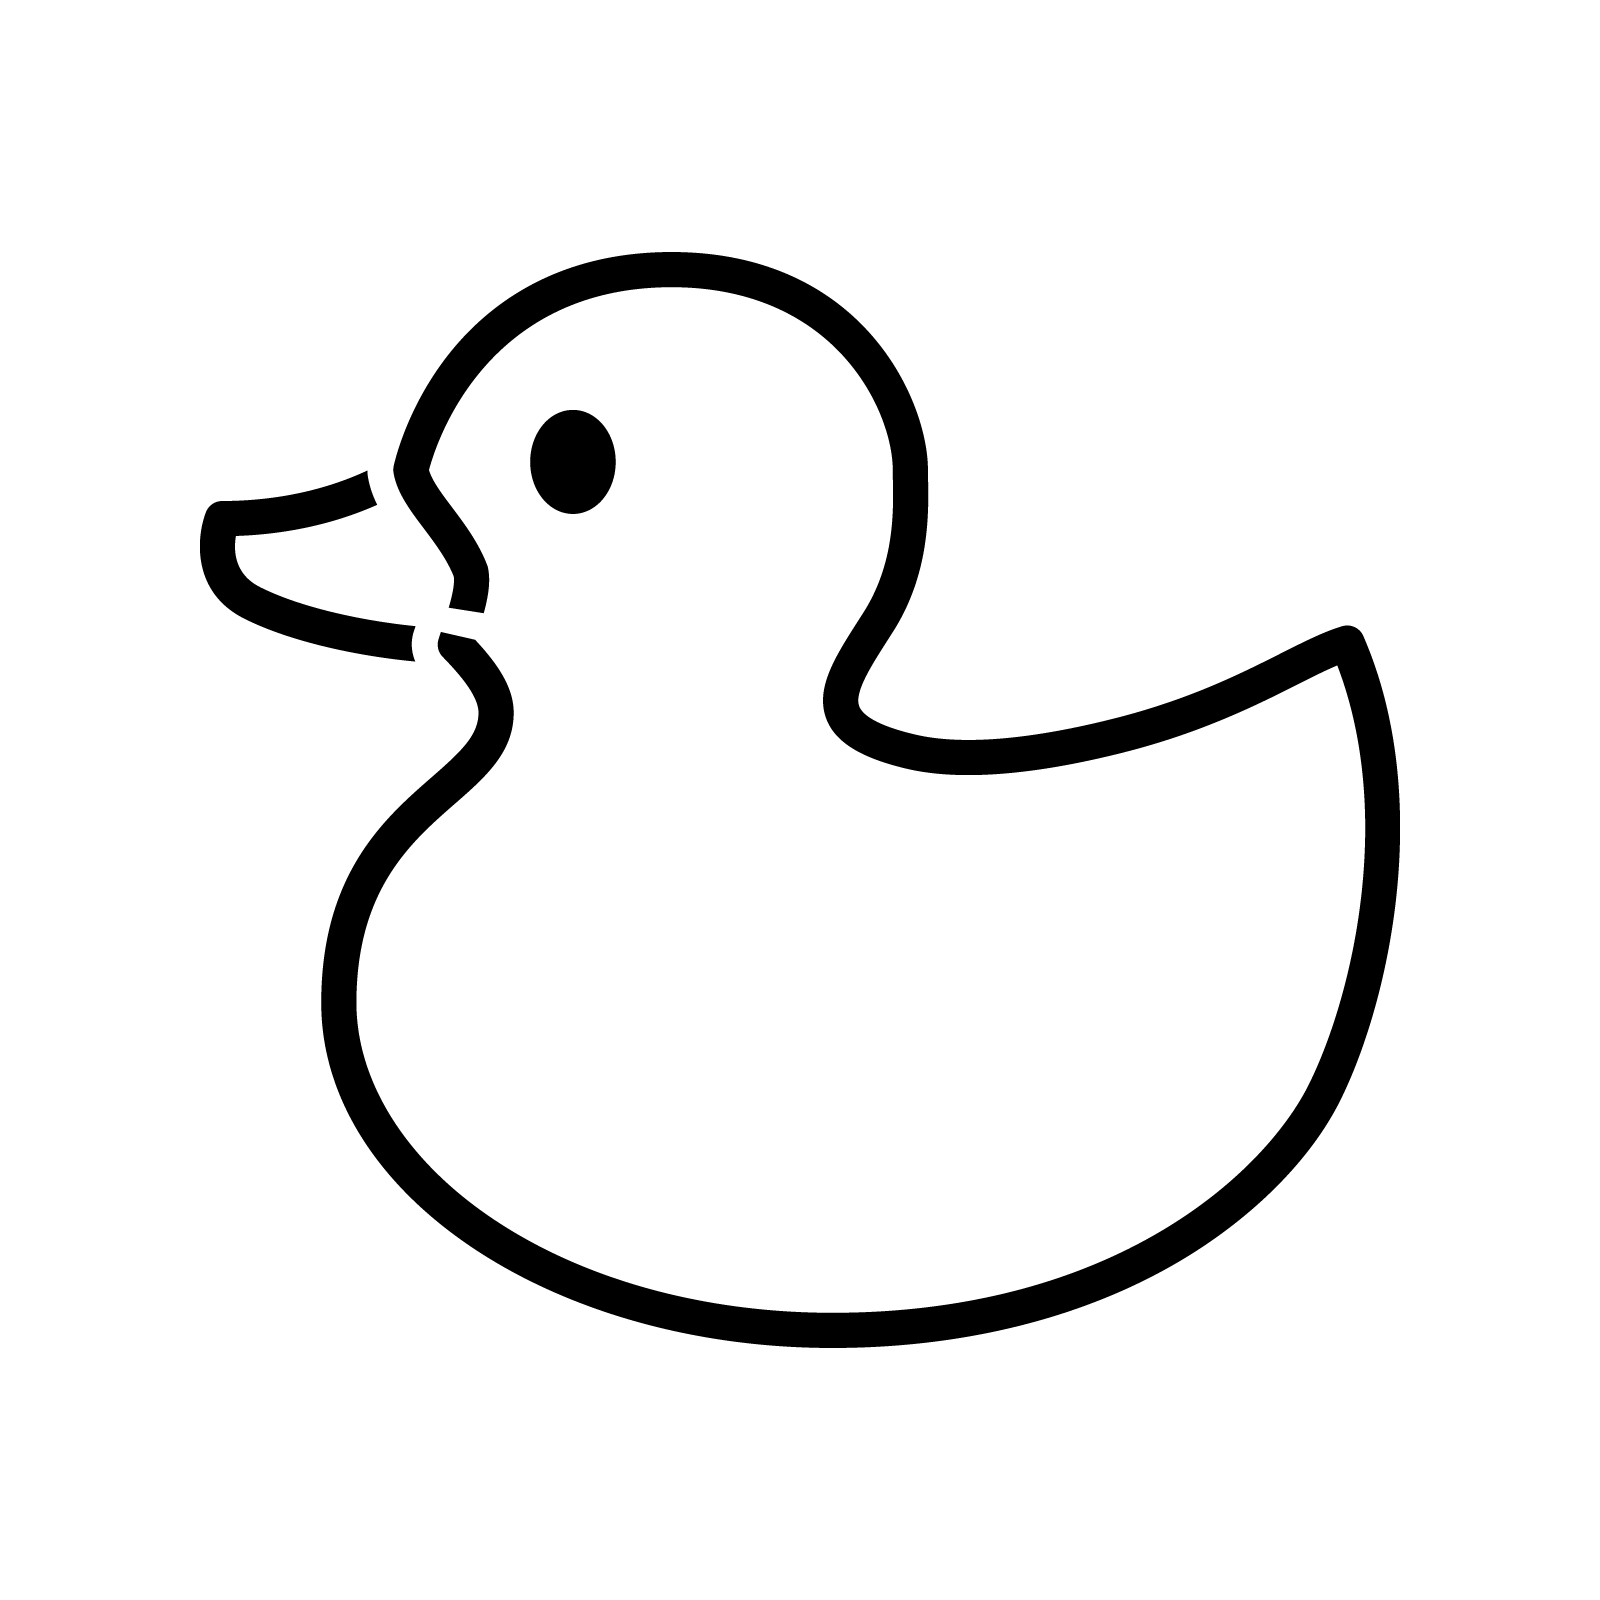 The best free Duck silhouette images. Download from 990 free